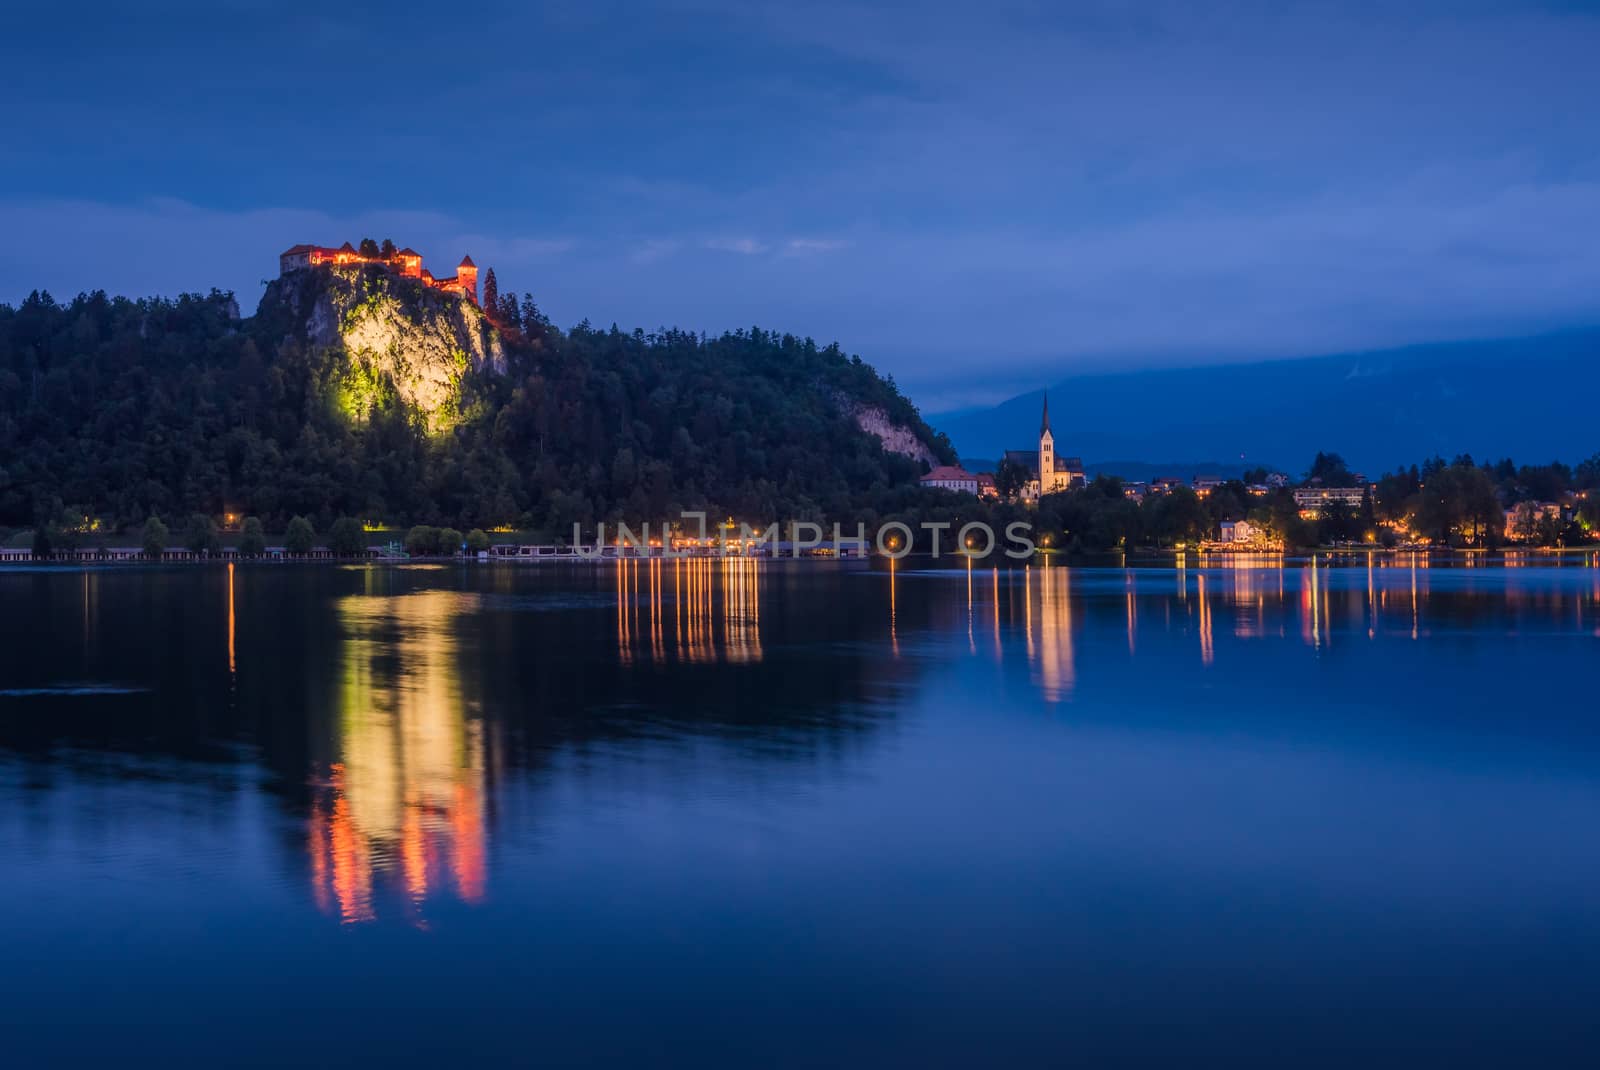 Illuminated Bled Castle at Bled Lake in Slovenia at Night Reflected on Water Surface